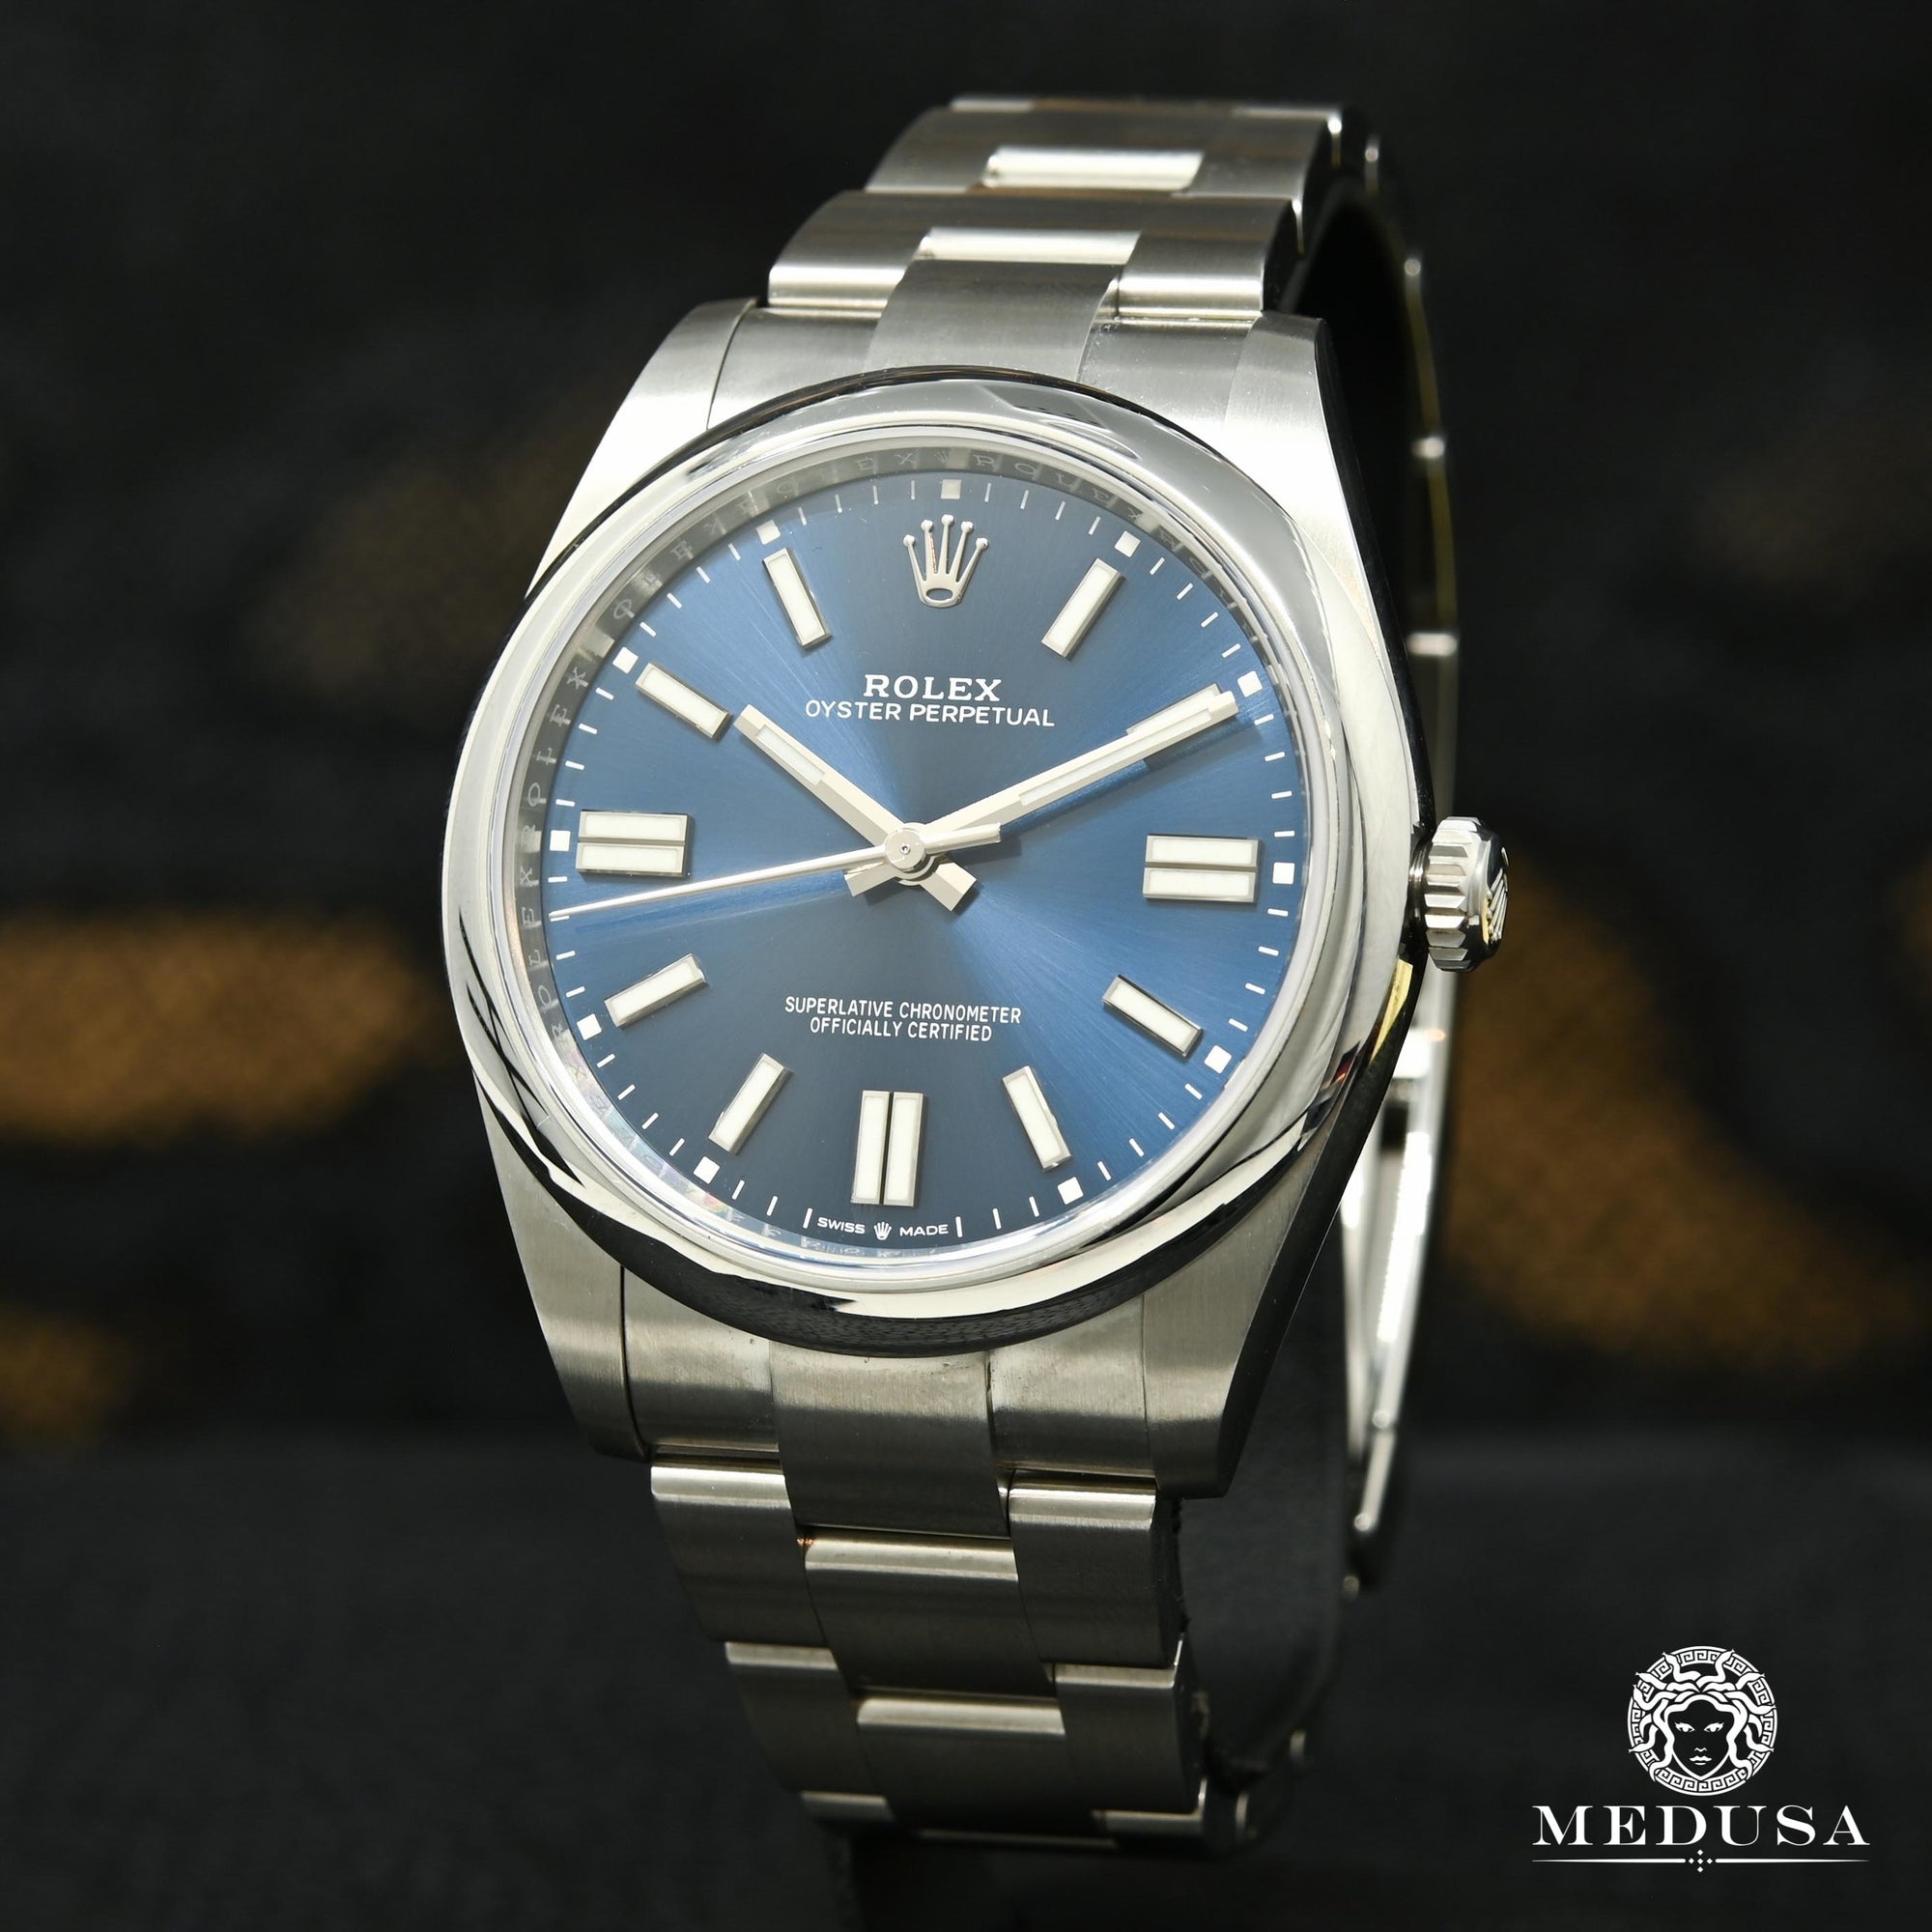 Rolex watch | Rolex Oyster Perpetual 41mm Men's Watch - Blue Stainless